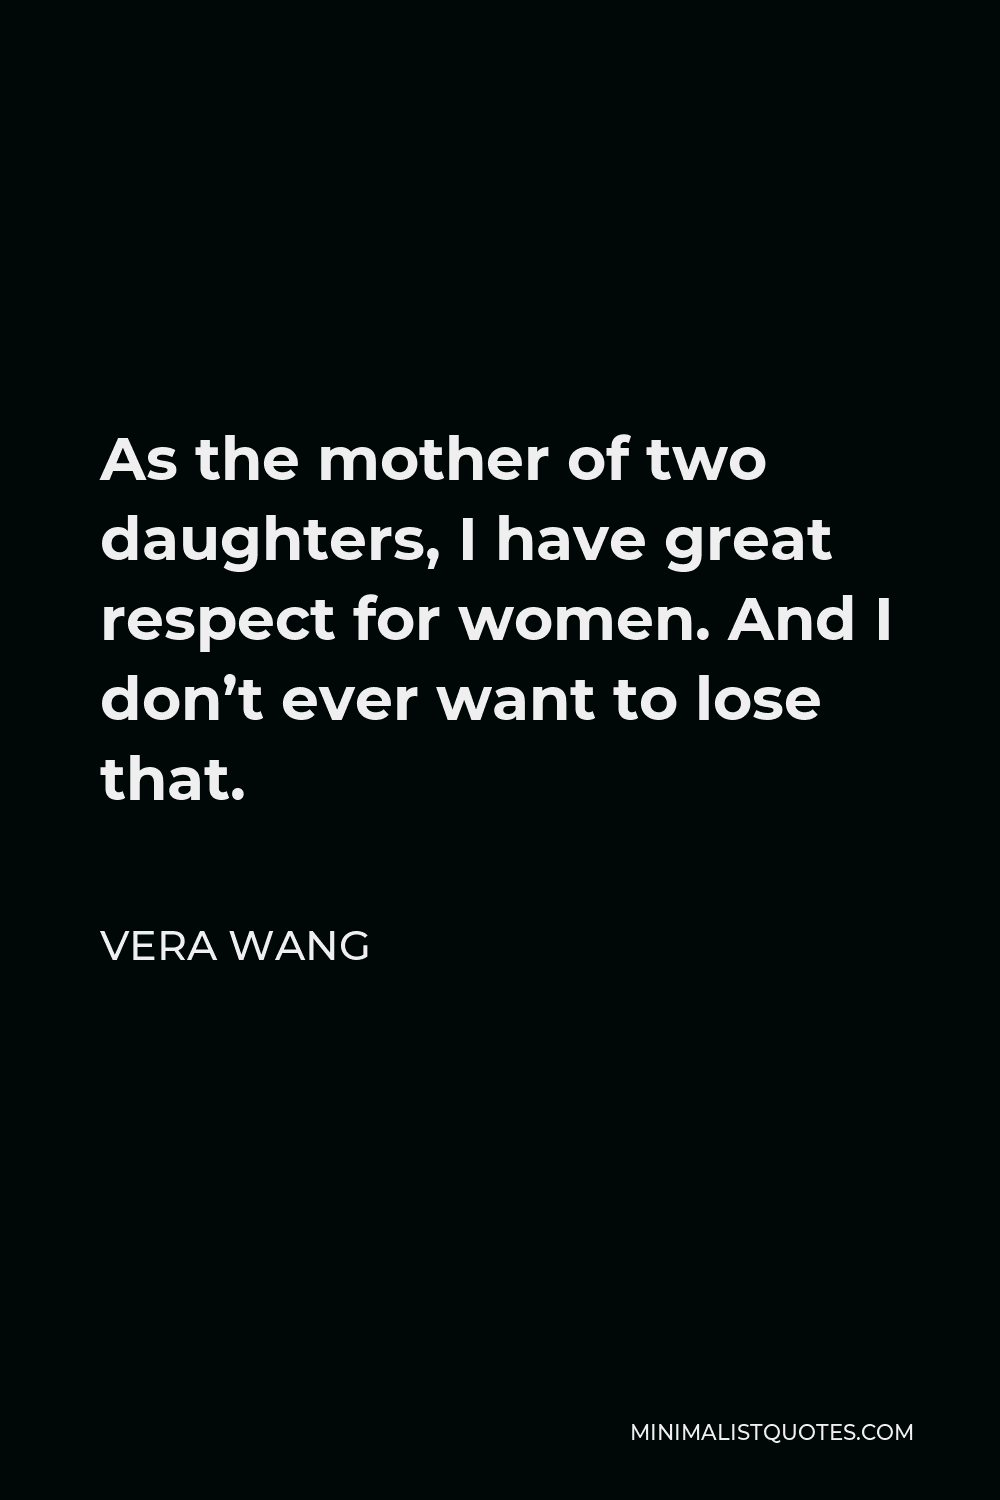 Vera Wang Quote - As the mother of two daughters, I have great respect for women. And I don’t ever want to lose that.